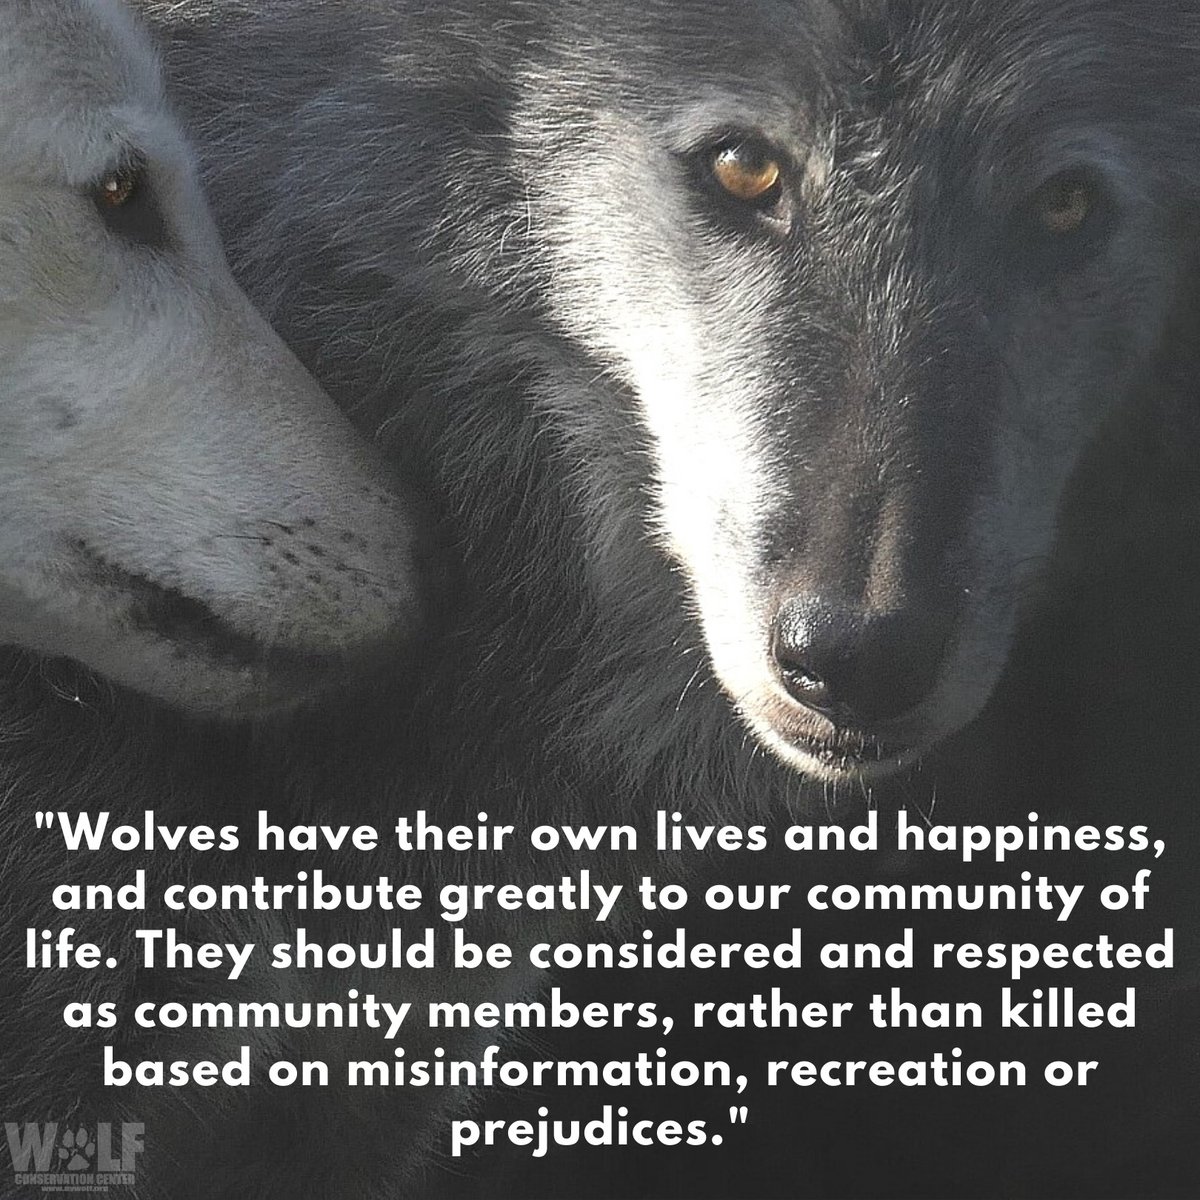 3/3: Wisconsin also showed its inability to commit to sound science + to carry out its essential responsibilities like enforcing quotas, addressing poaching, + assuring tribes maintain their longstanding rights to natural resources.
#RelistWolves